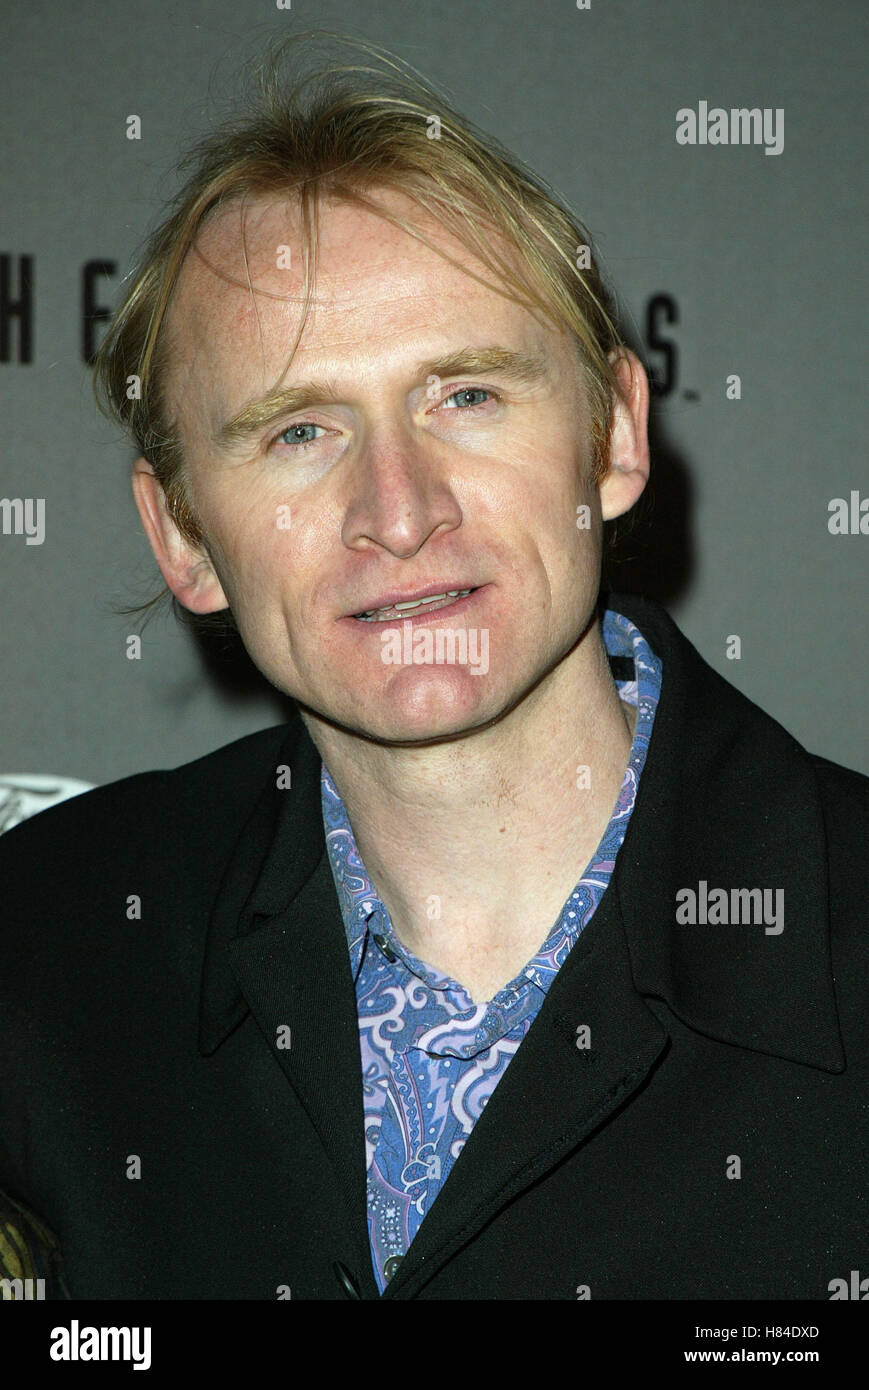 DEAN HAGLUND X-FILES FINALE WARP PARTY HOUSE OF BLUES HOLLYWOOD LOS ANGELES USA 27 April 2002 Stock Photo